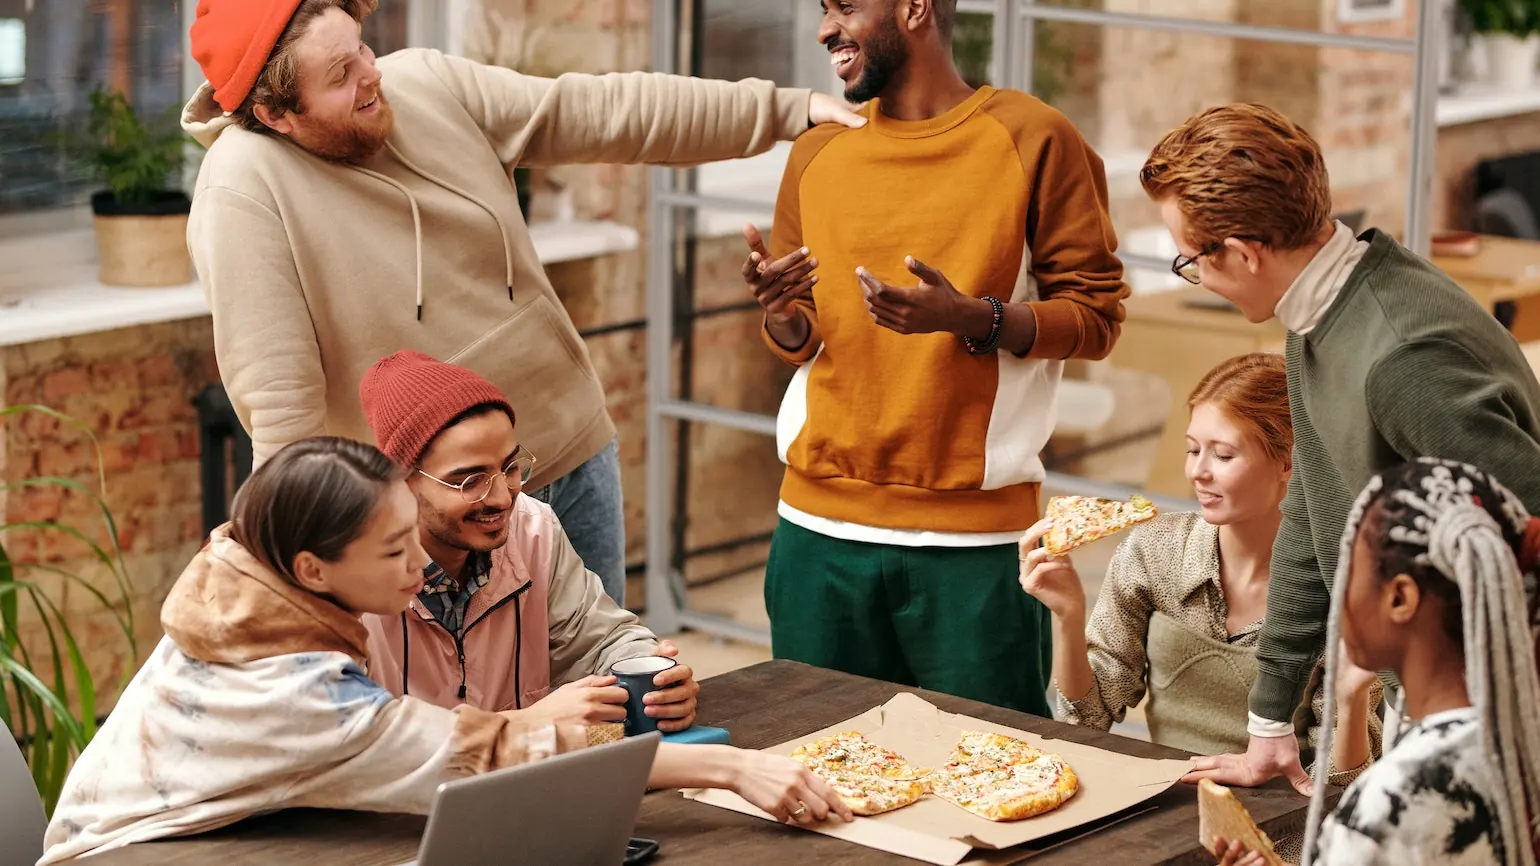 Social events like a pizza party can engage your coworking community